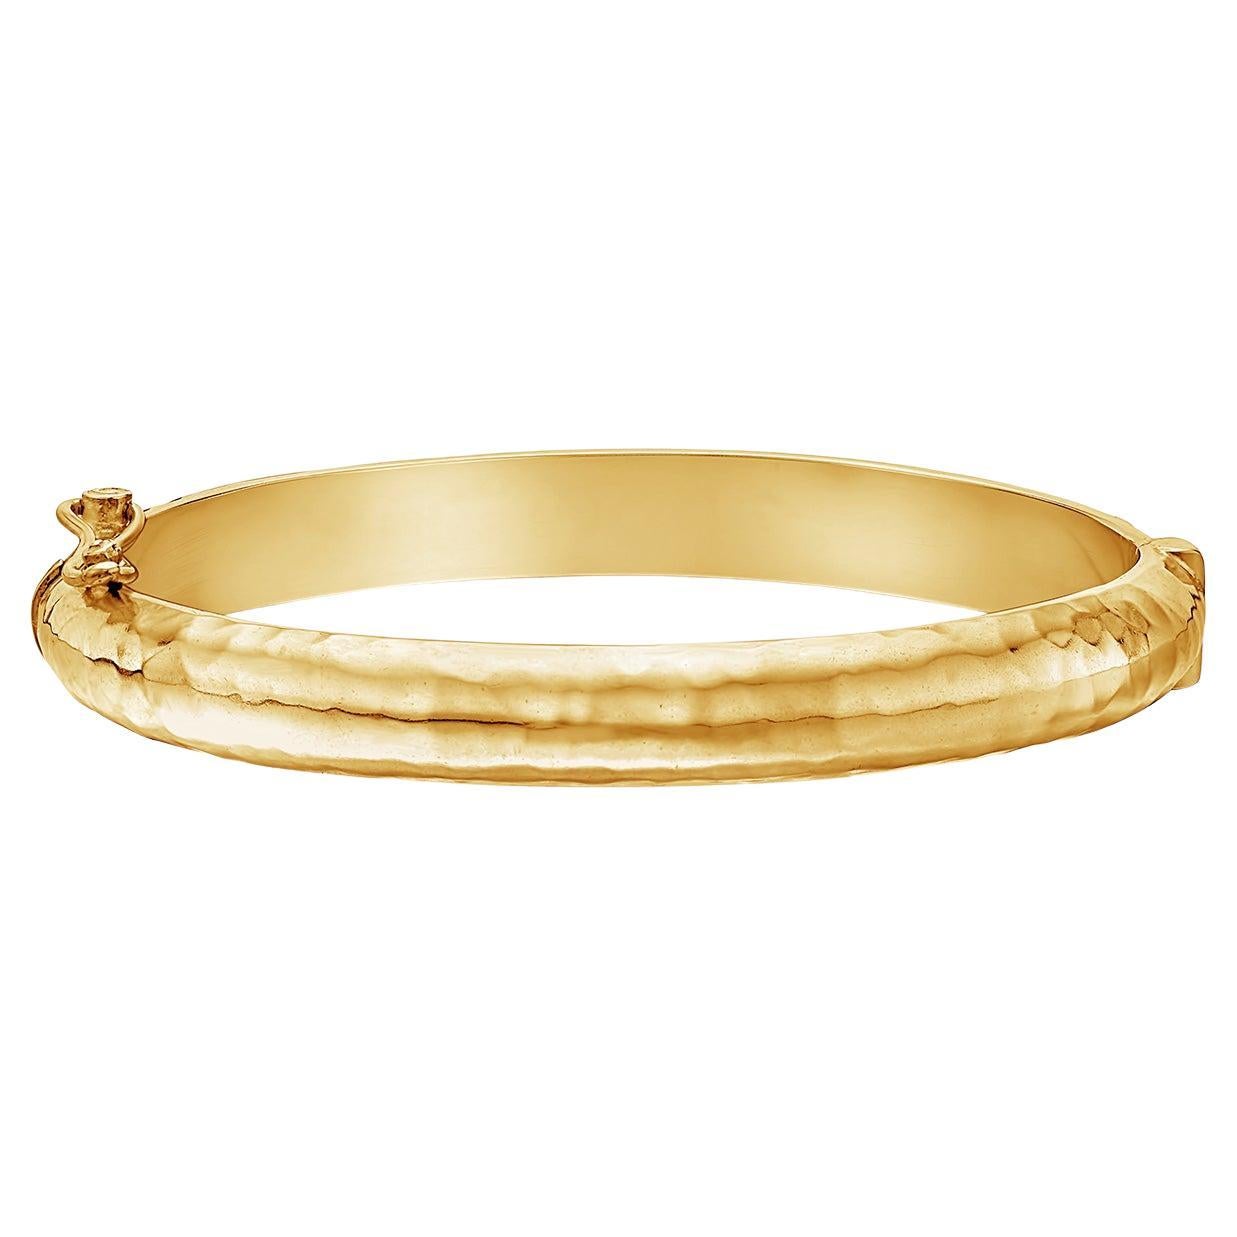 6mm Hinged Hammered Nomad Bangle In 18ct Gold Vermeil